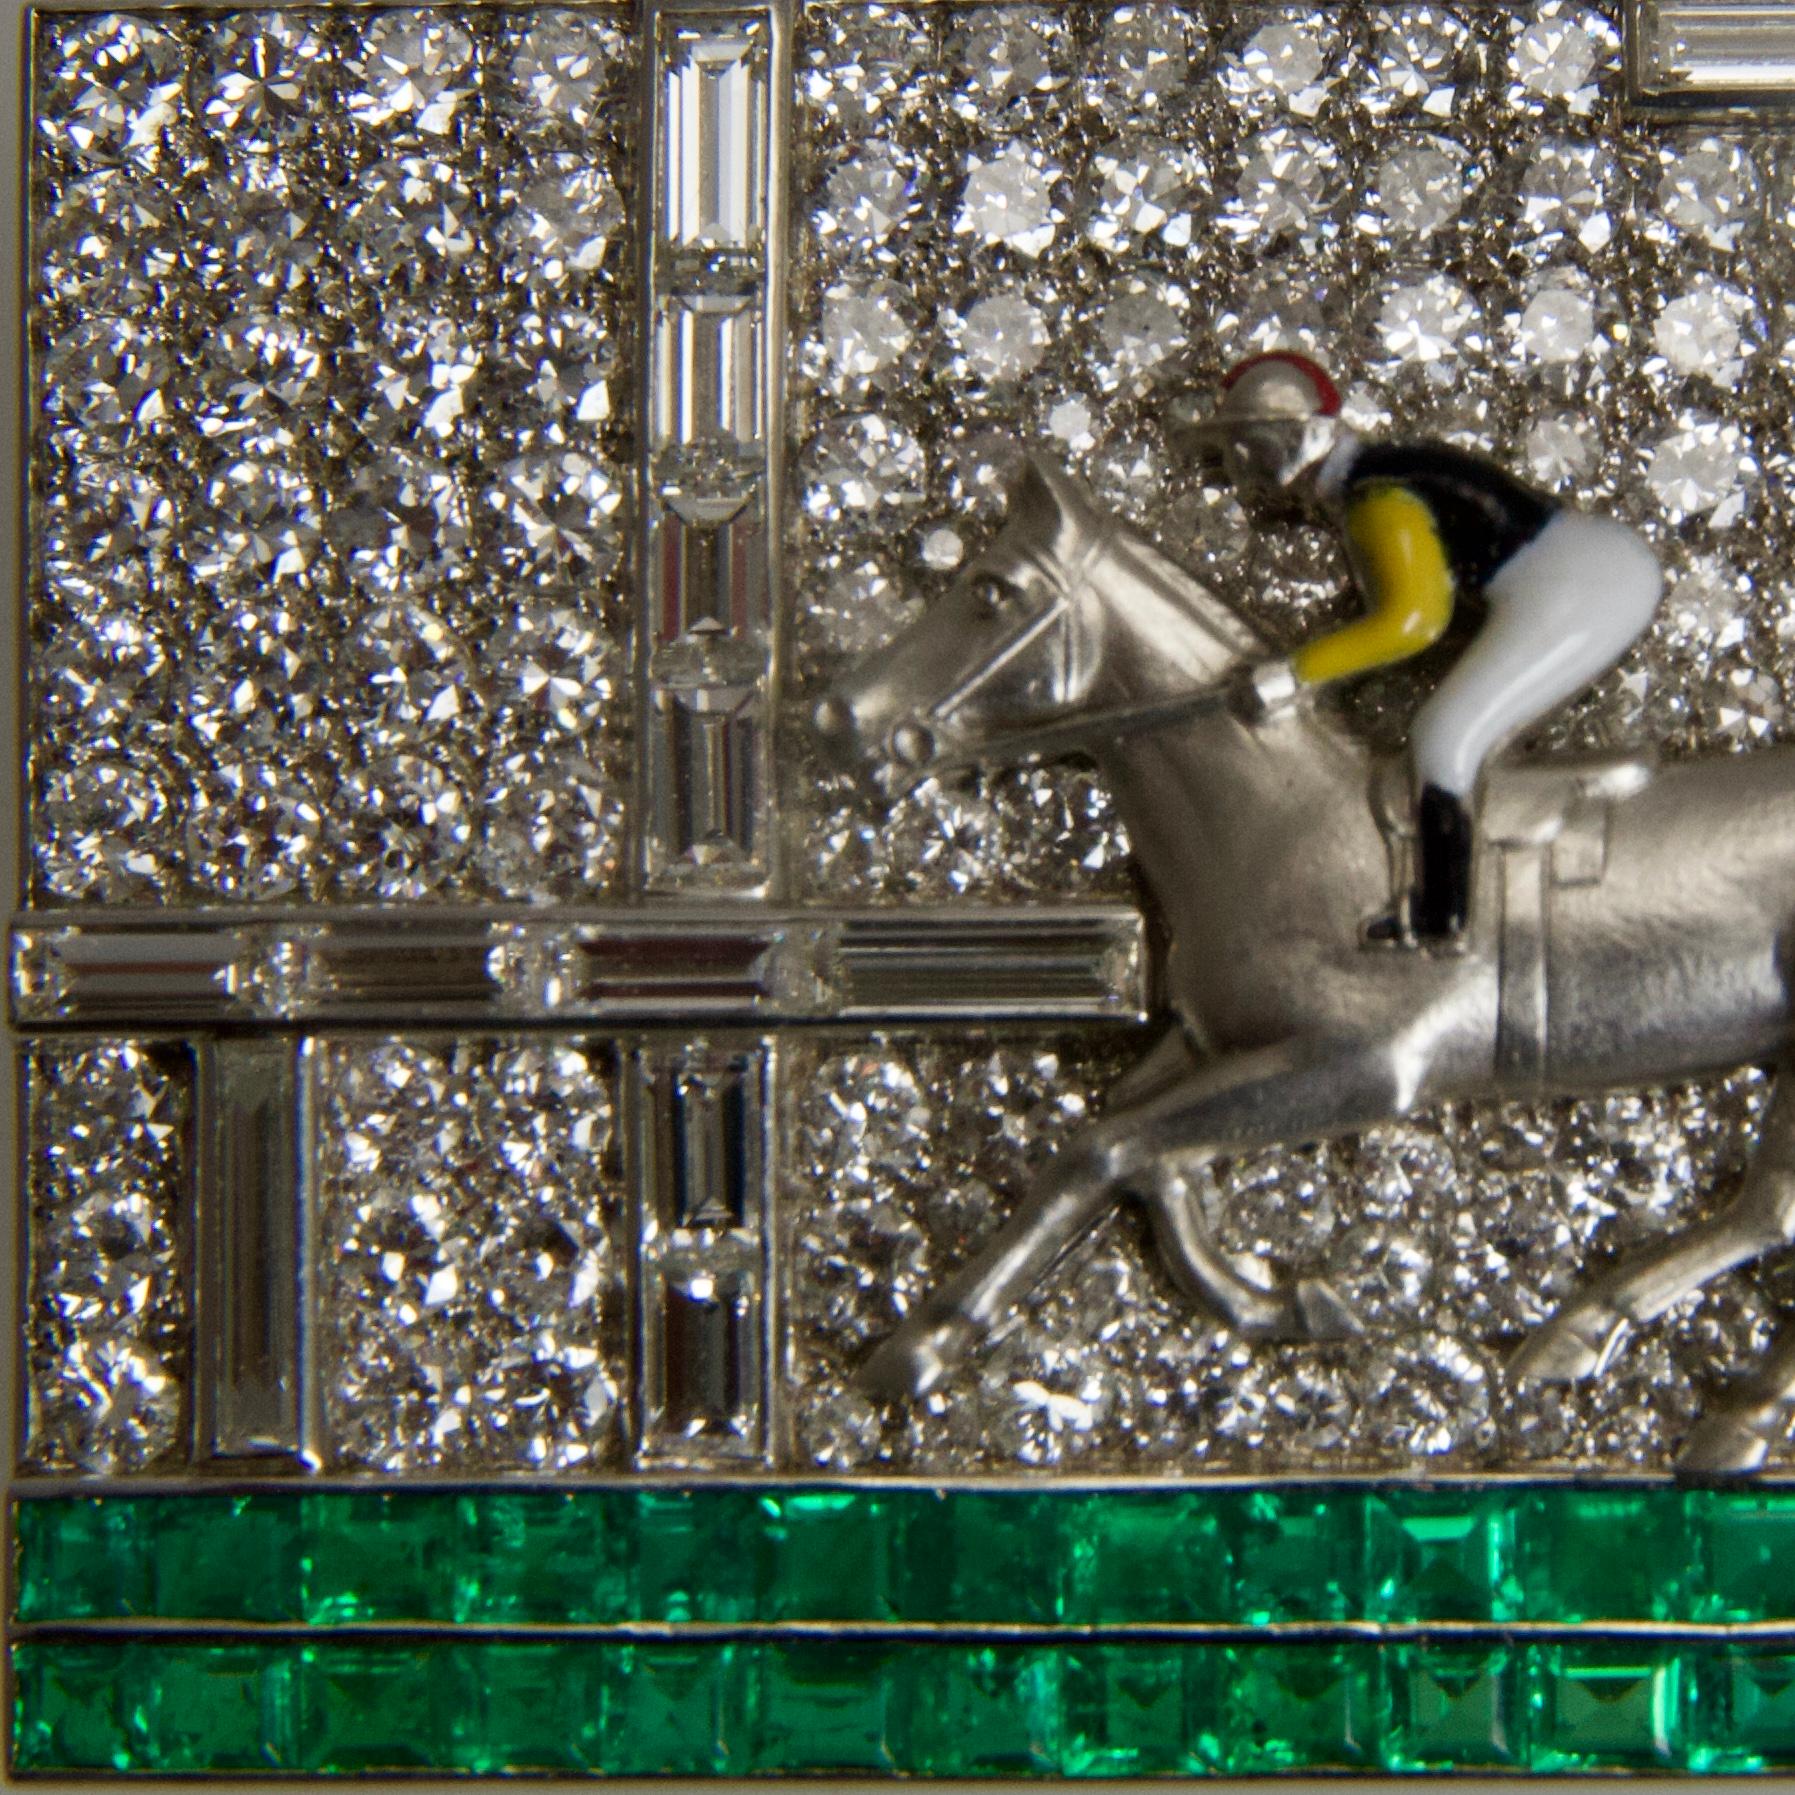 Rectangular brooch in platinum 950 representing a jockey on its horse during a race. 
Body in enamel. Diamonds round and baguettes cut, emeralds calibrés. All in the best quality of this period set, clarity and color of stones, design. 
Diamonds